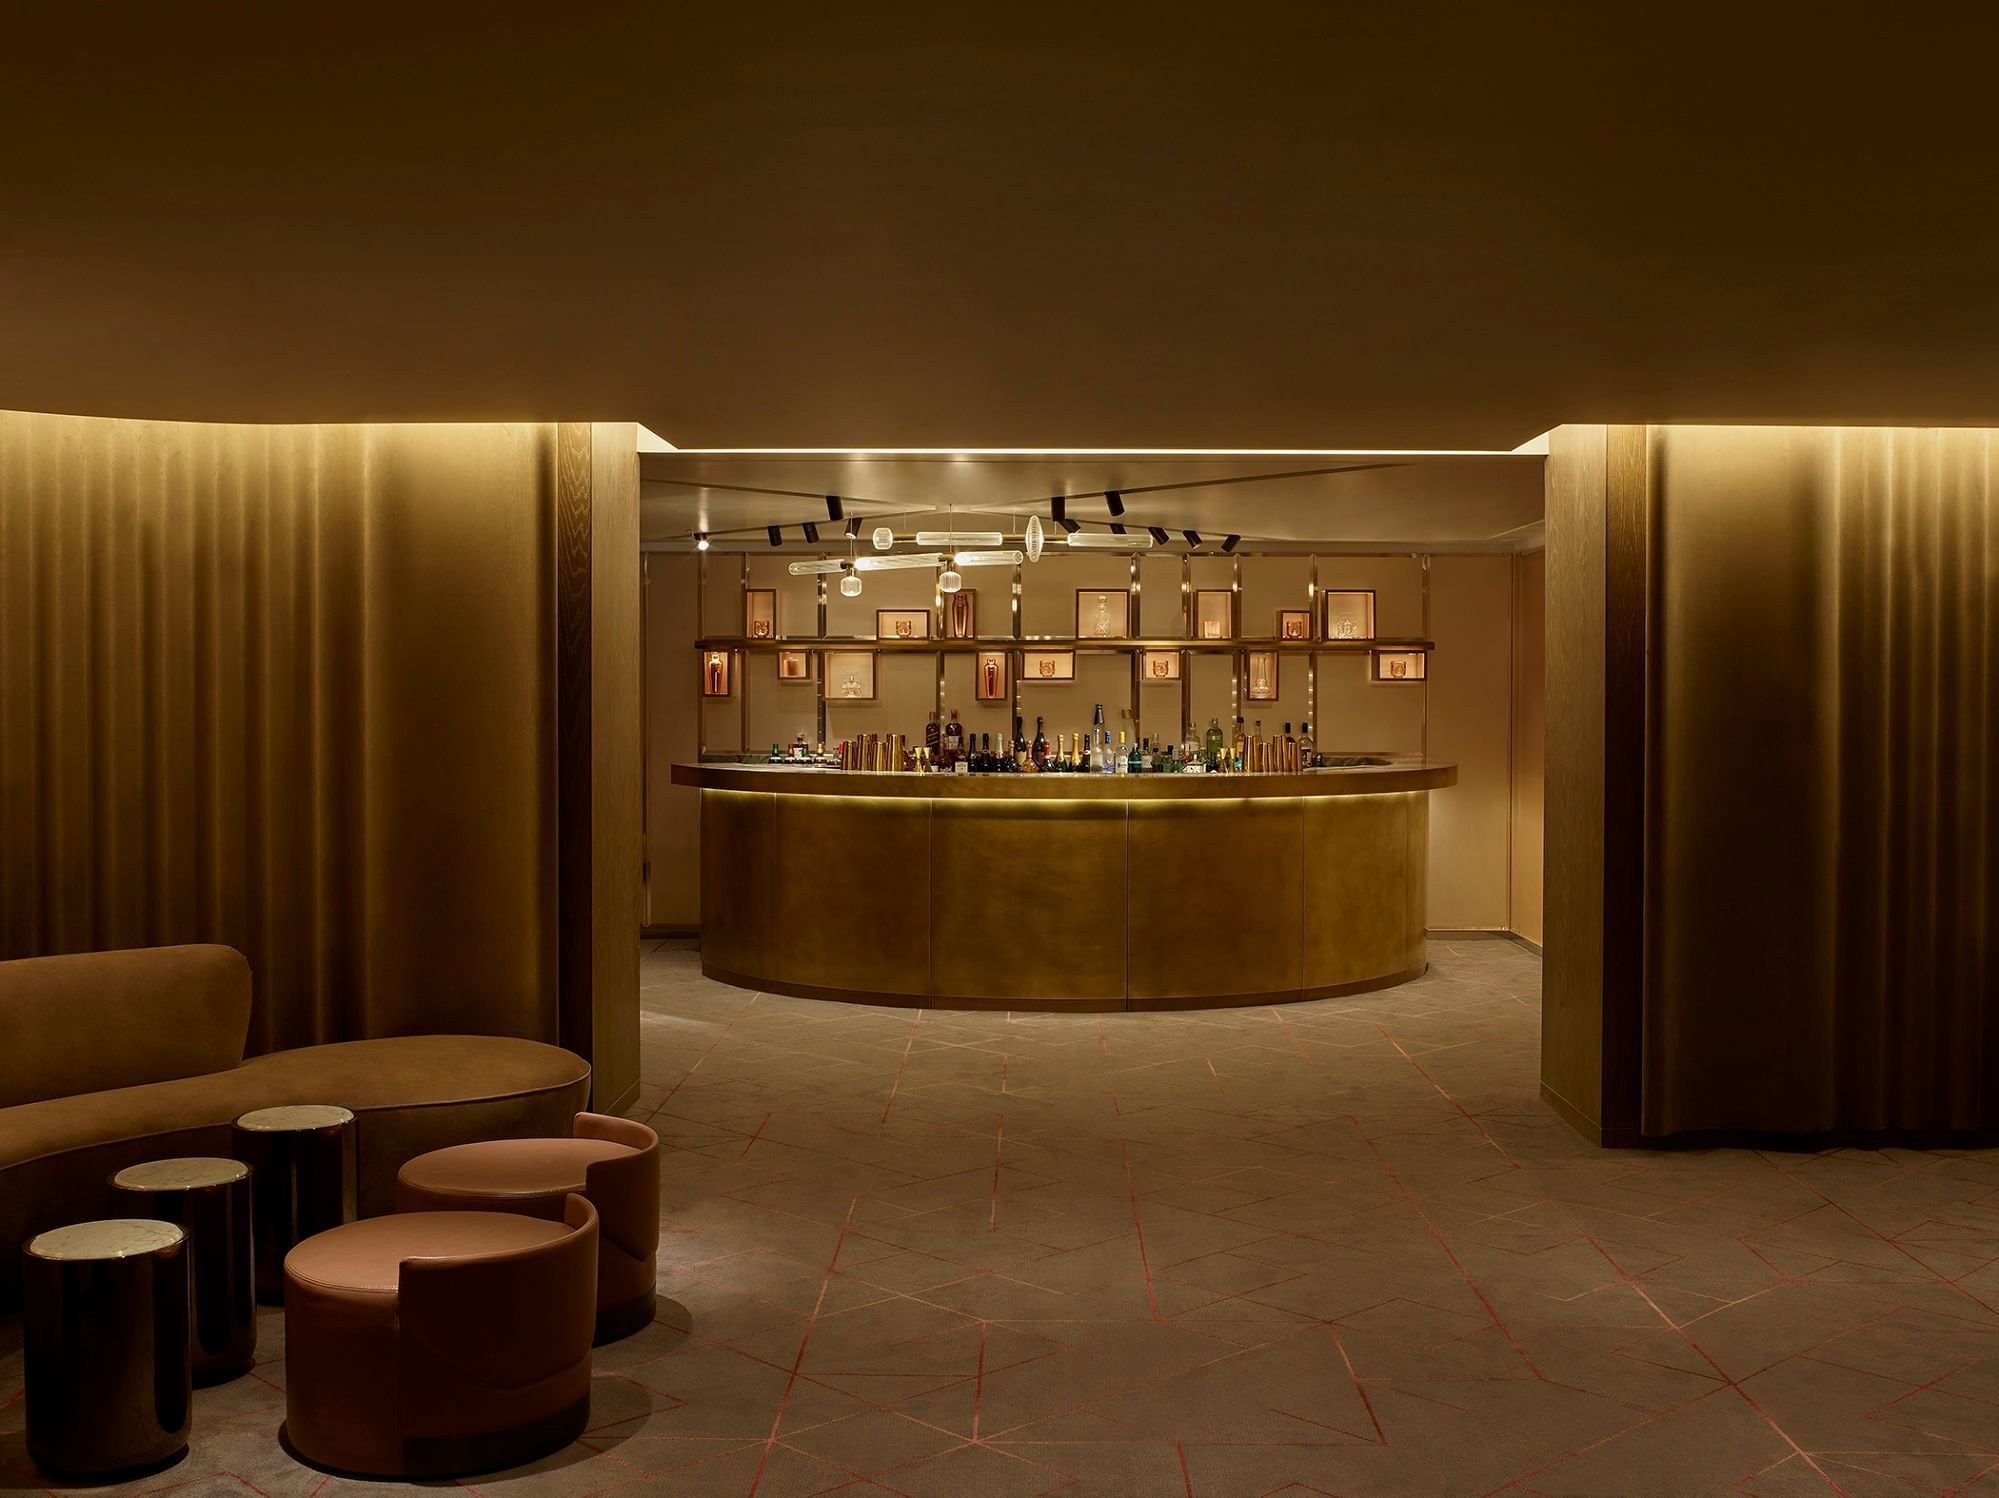 Concept design of a Bar & lounge area at The Londoner Hotel